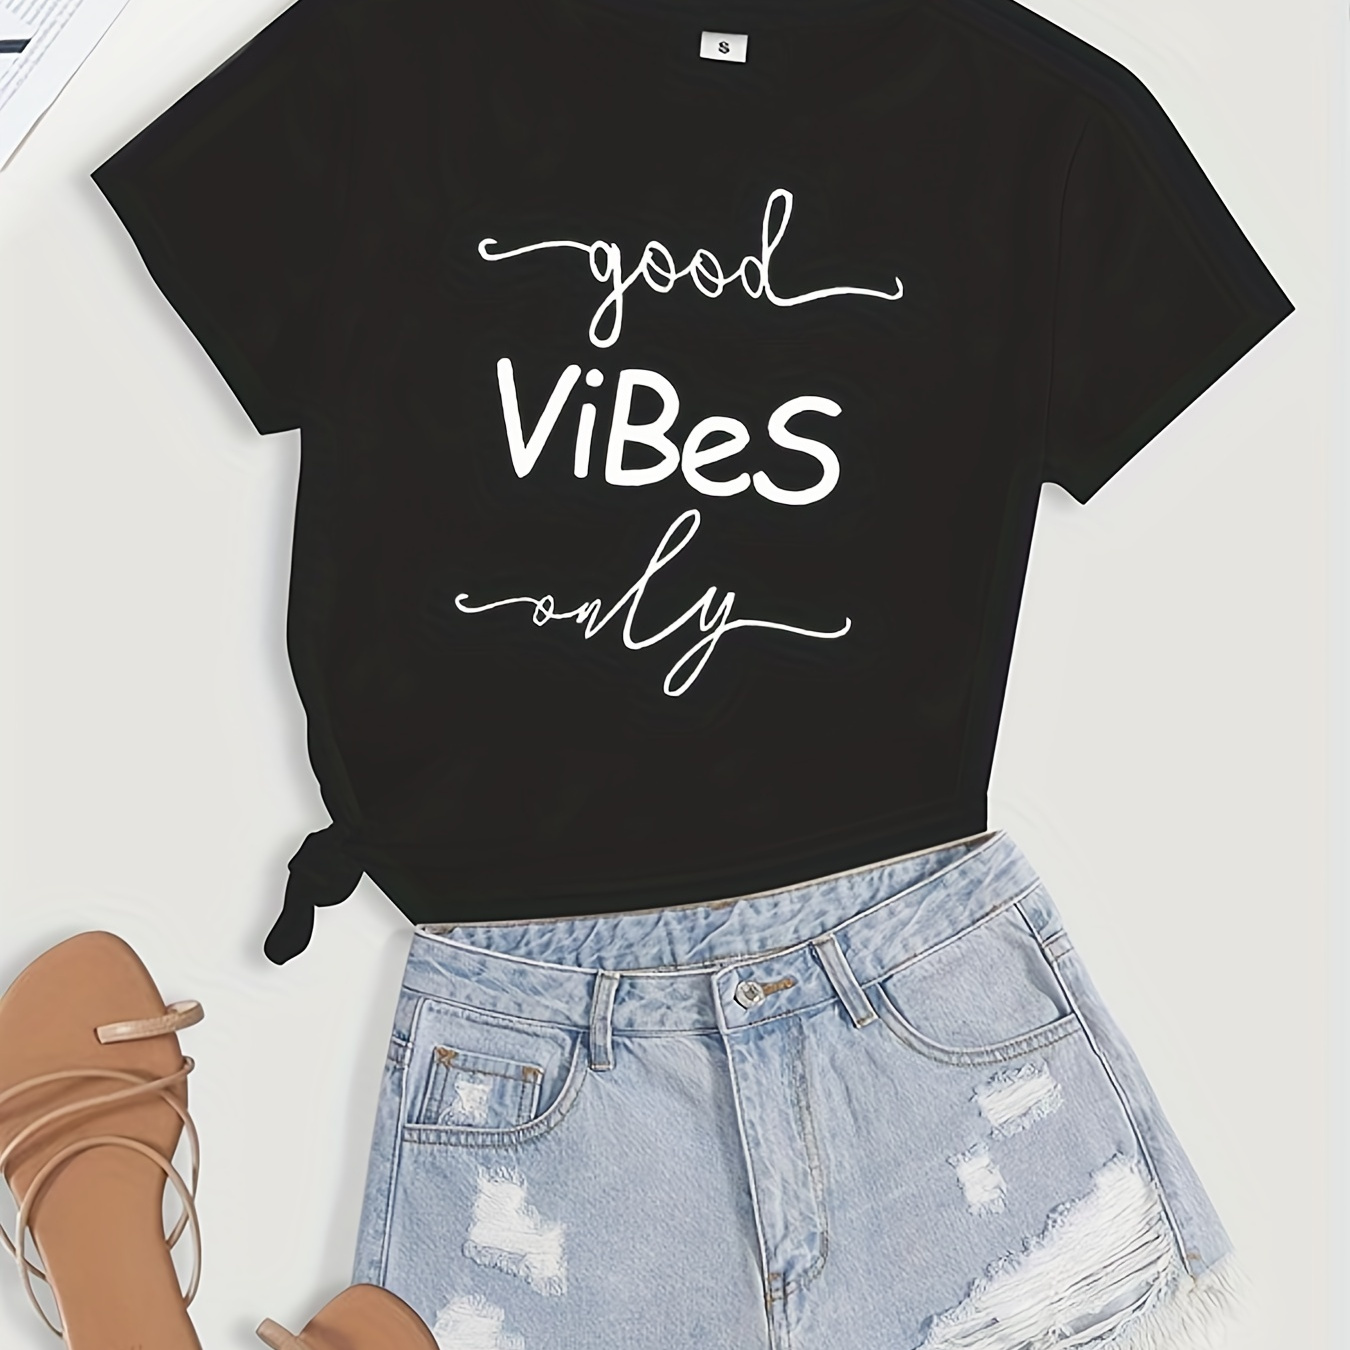 

Good Vibes Only Print T-shirt, Short Sleeve Crew Neck Casual Top For Summer & Spring, Women's Clothing